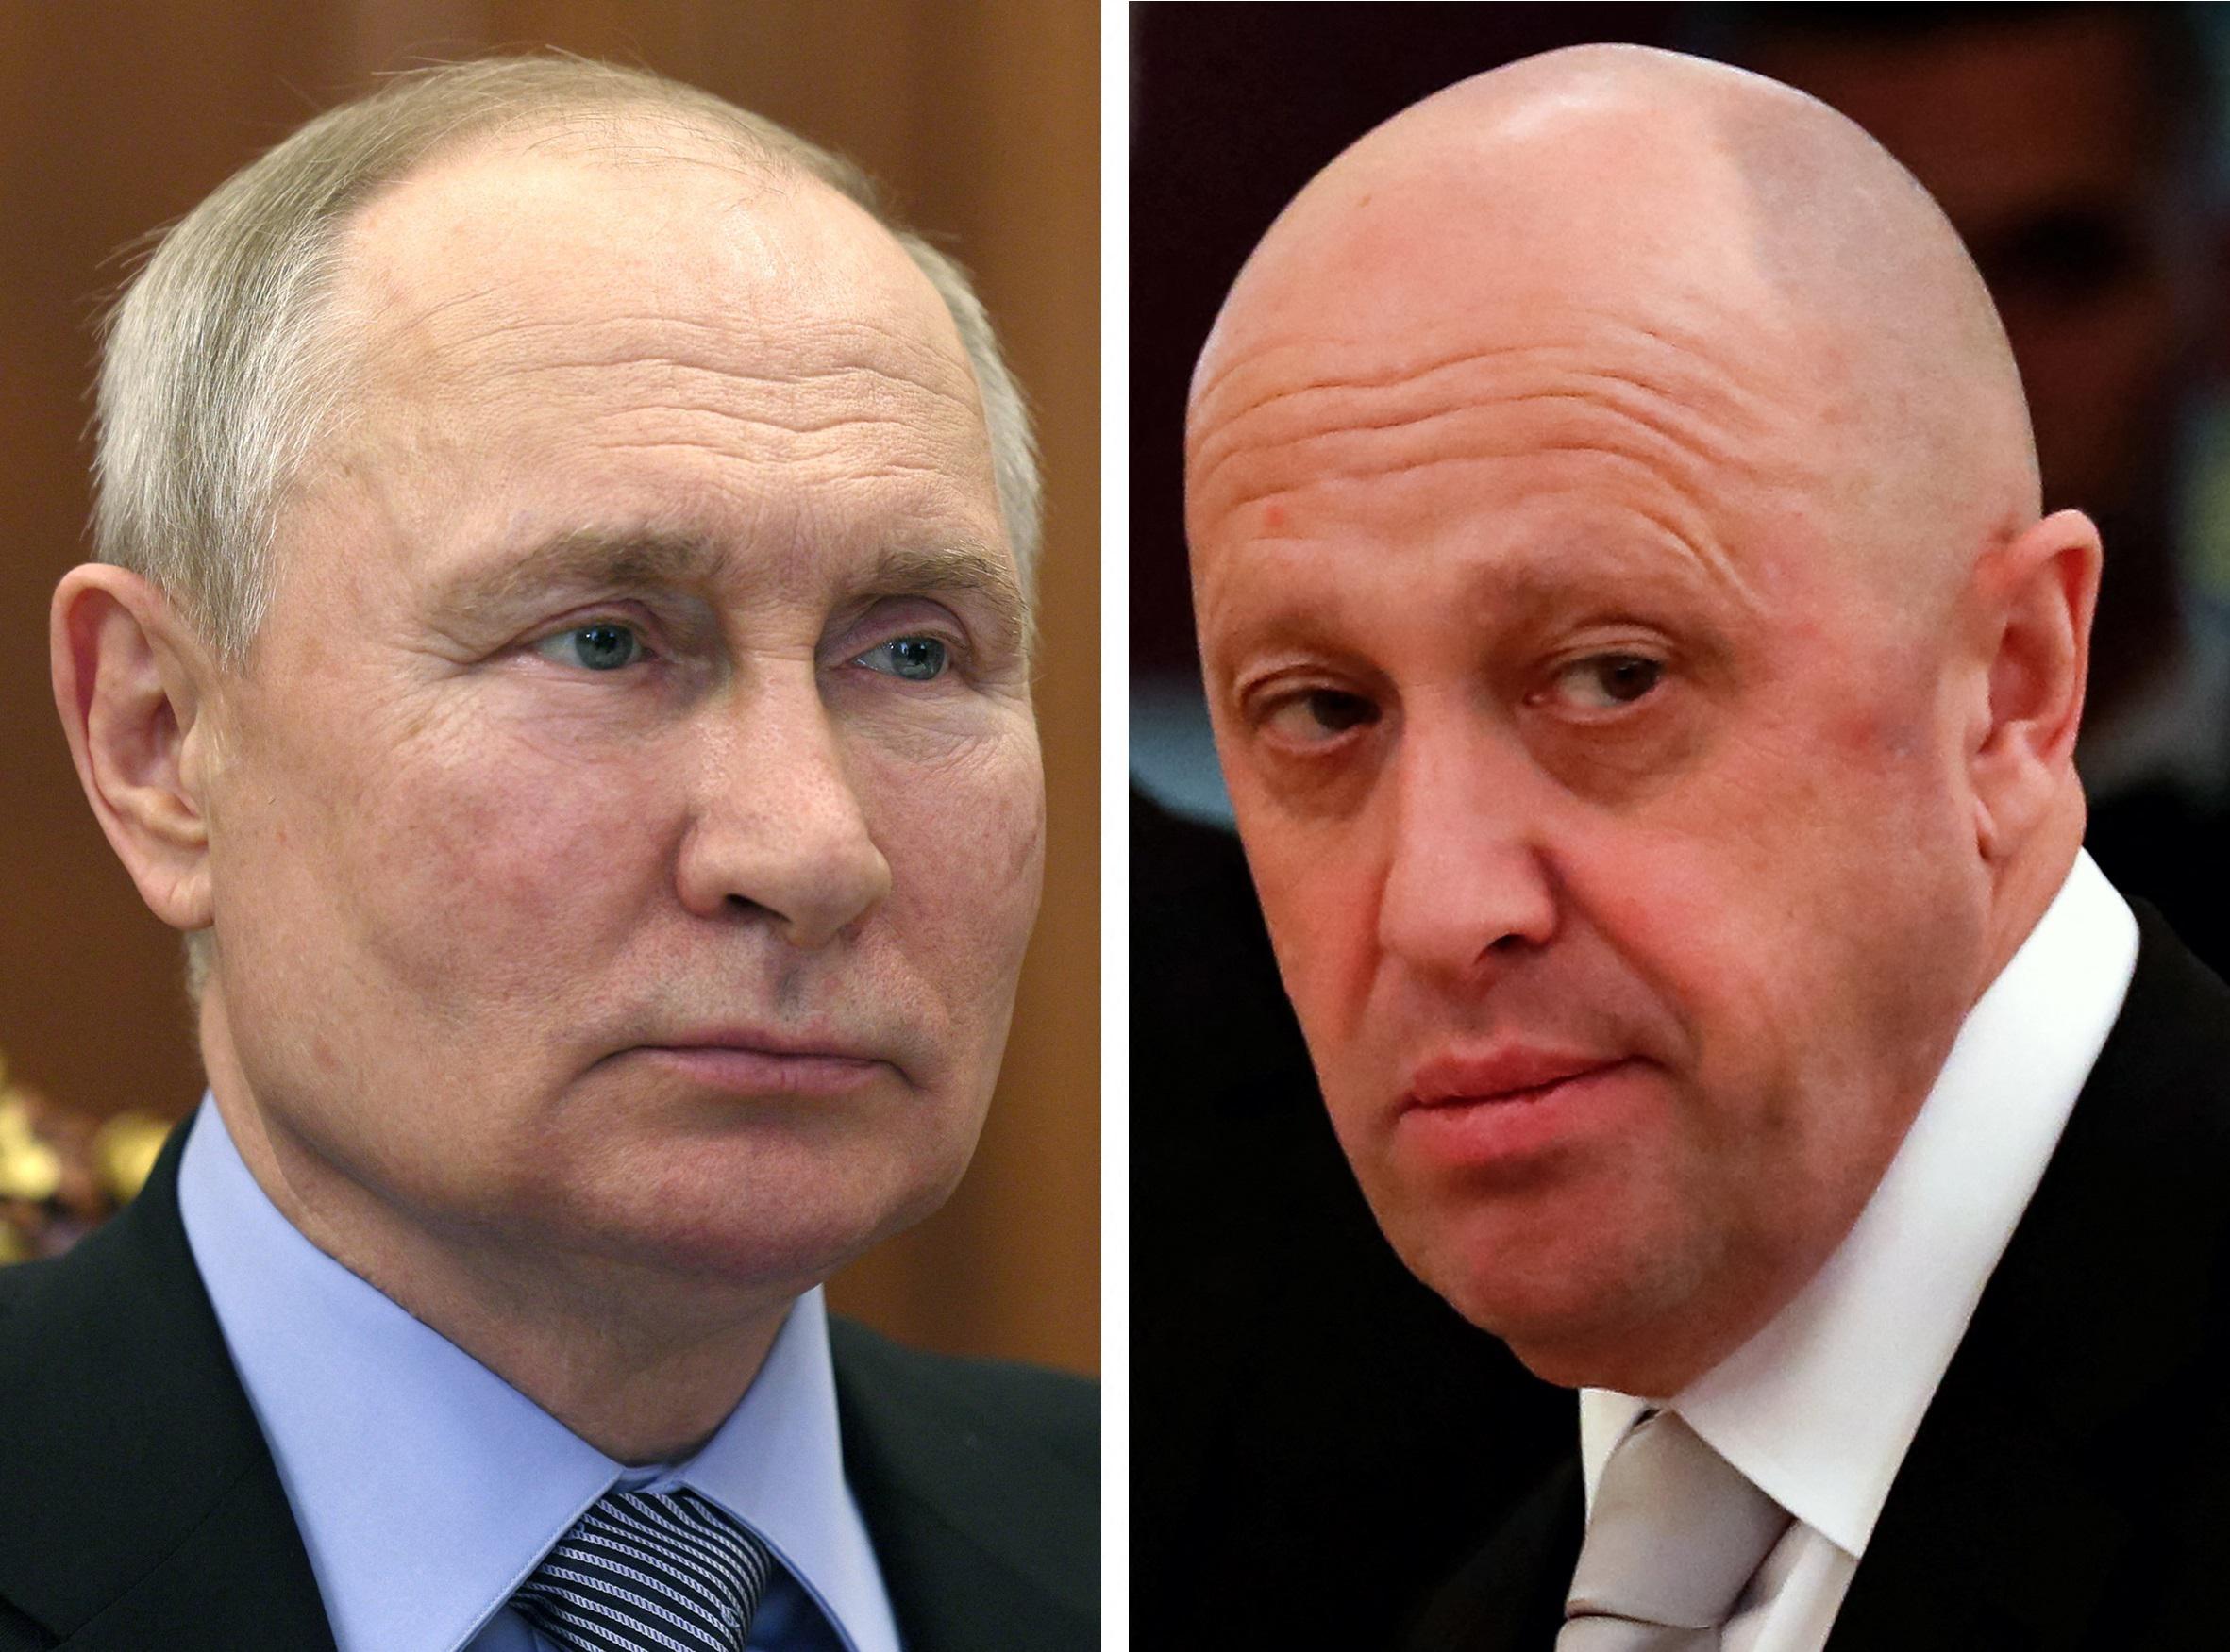 “Putin made a deal with Prigozhin to save his own skin”